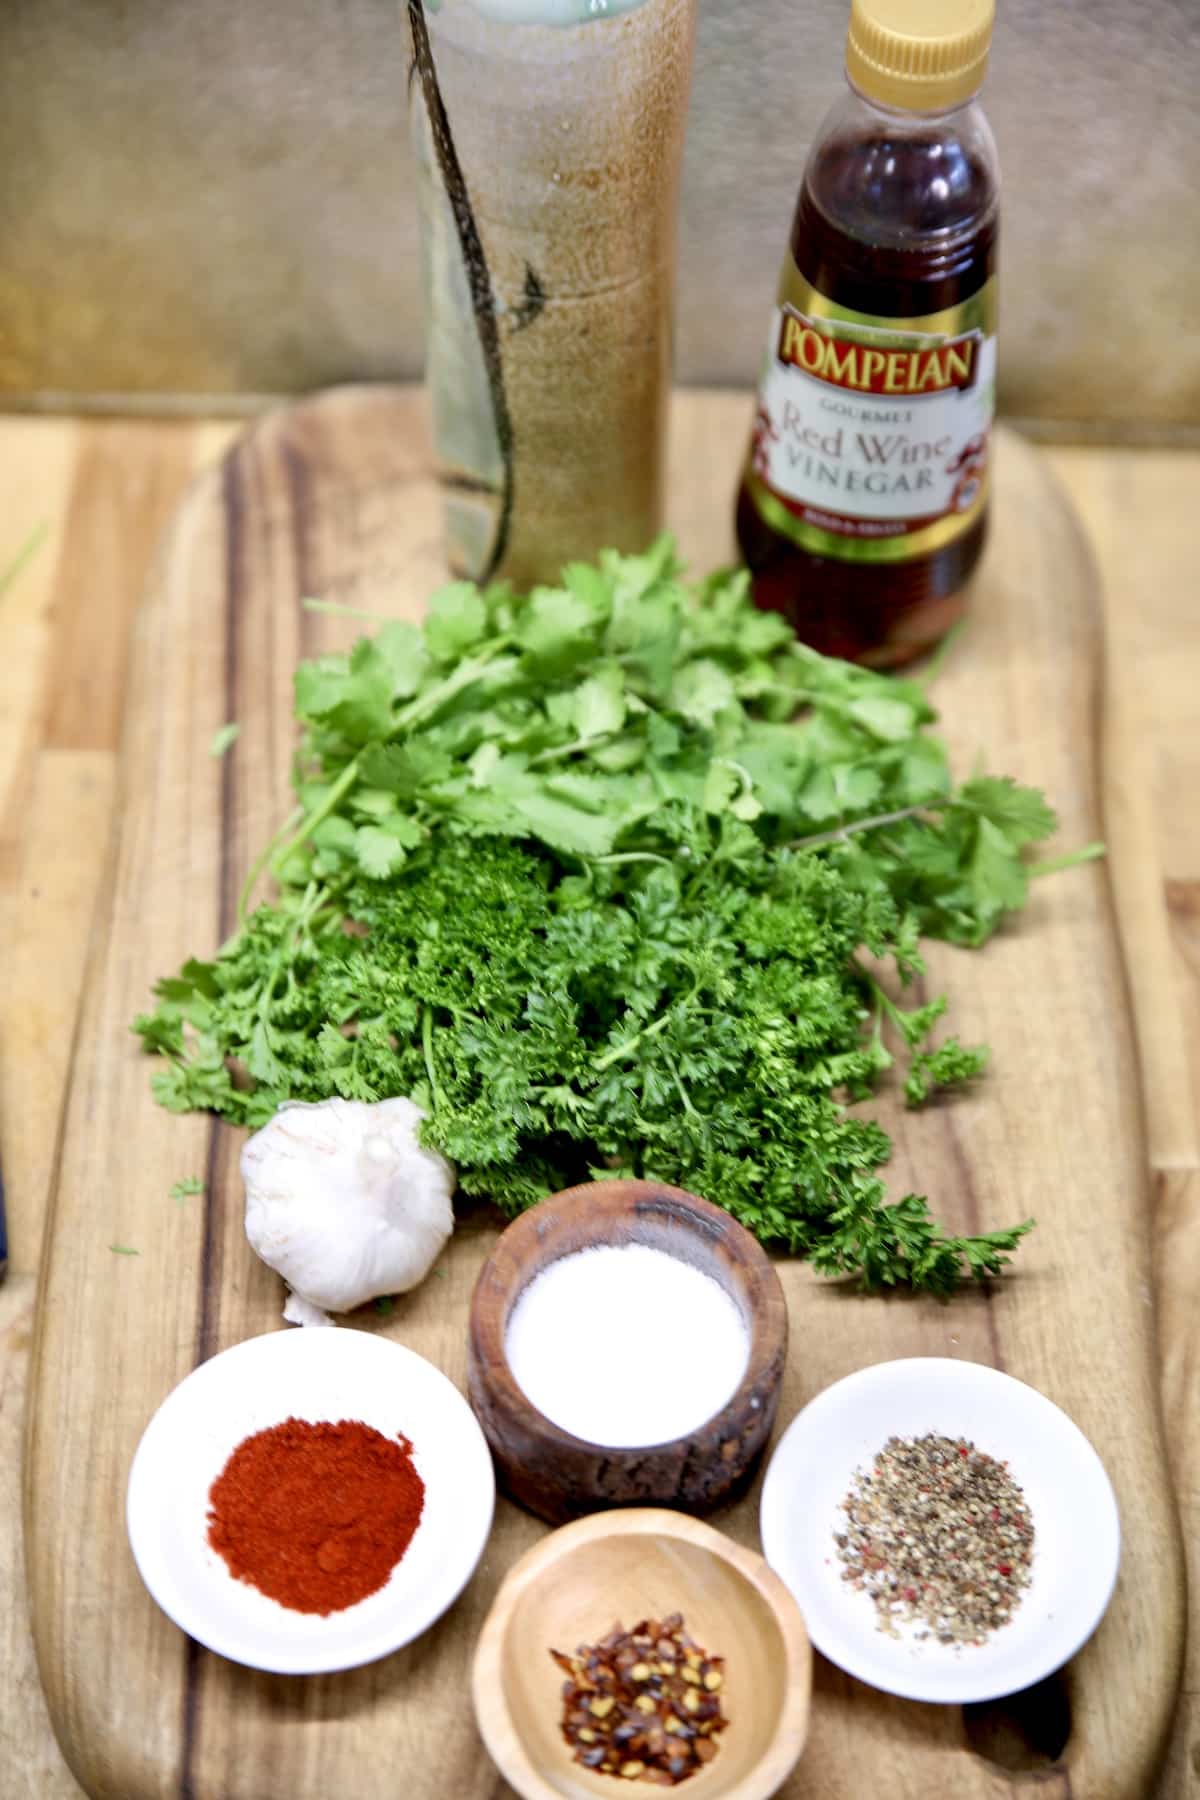 Ingredients for chimichurri sauce.